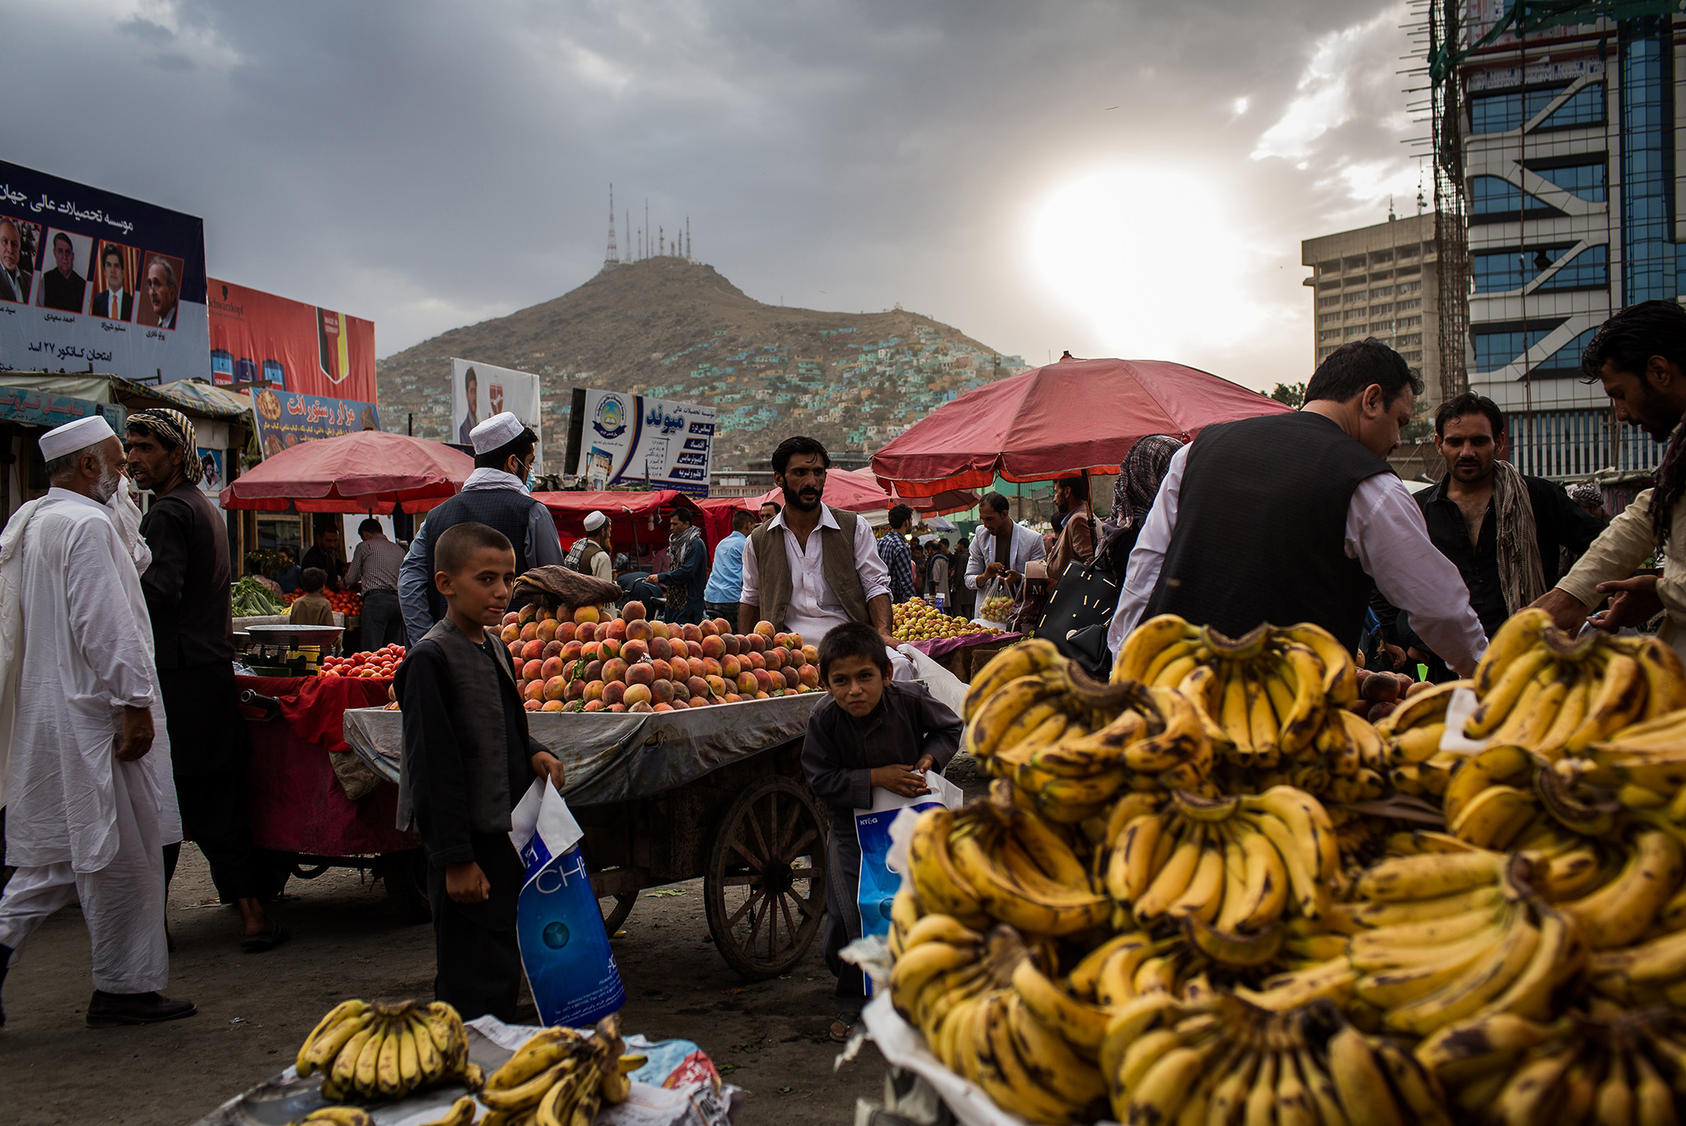 Customers shop for fruits at the retail market in Kabul, Aug. 8, 2017. (Jim Huylebroek/The New York Times)